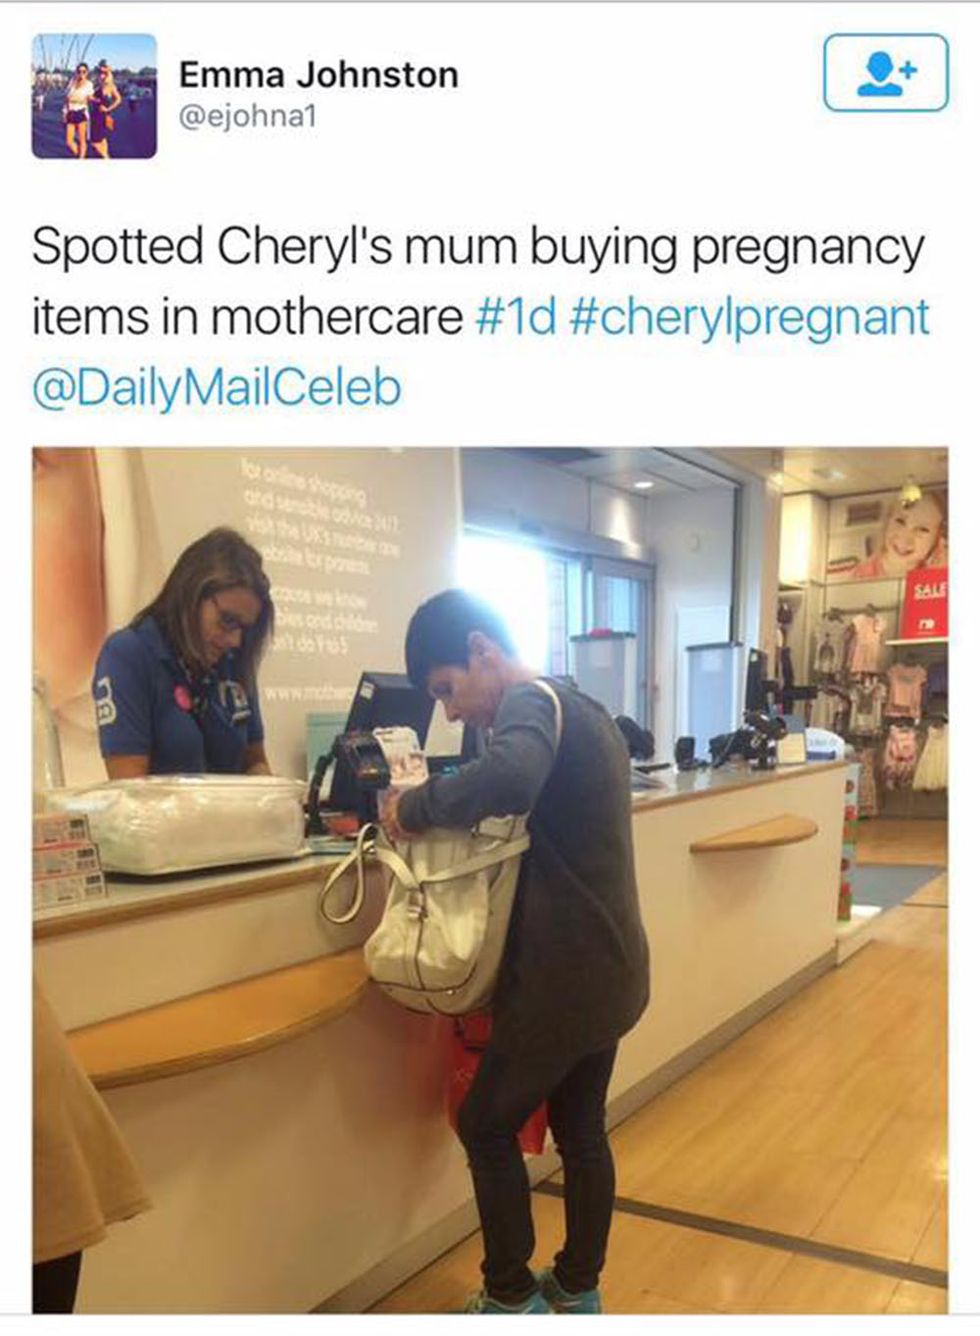 Cheryl's mum spotted shopping for baby things amid Liam Payne pregnancy rumours